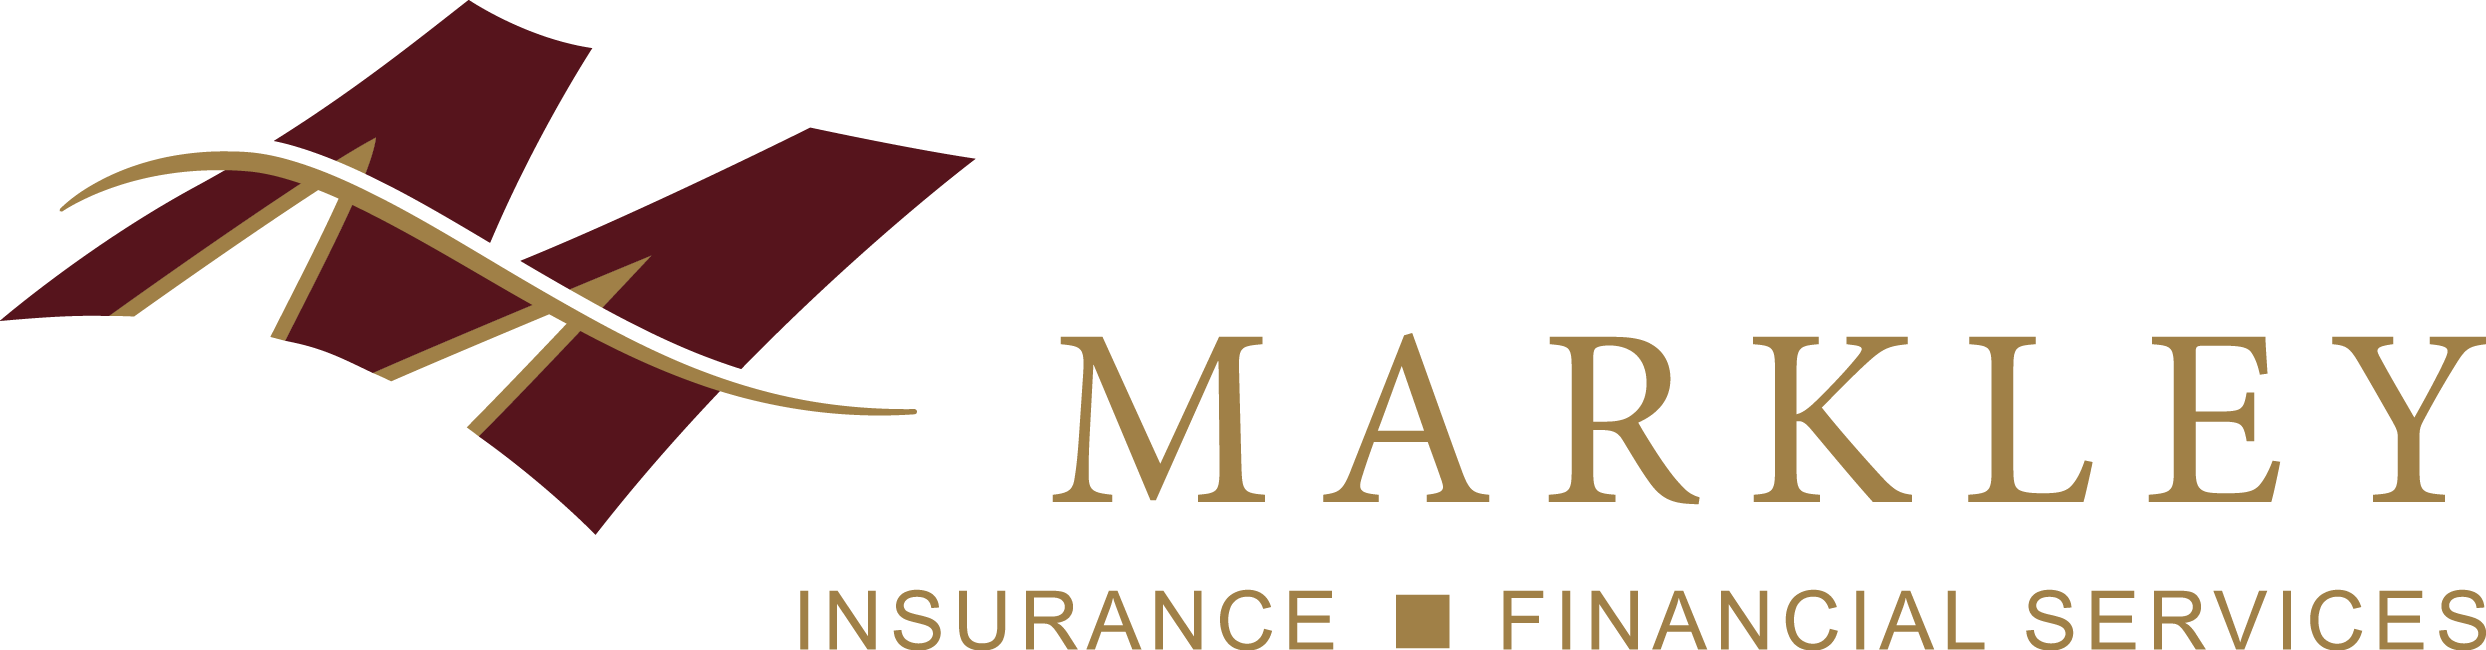 Markley Insurance and Financial Services Logo